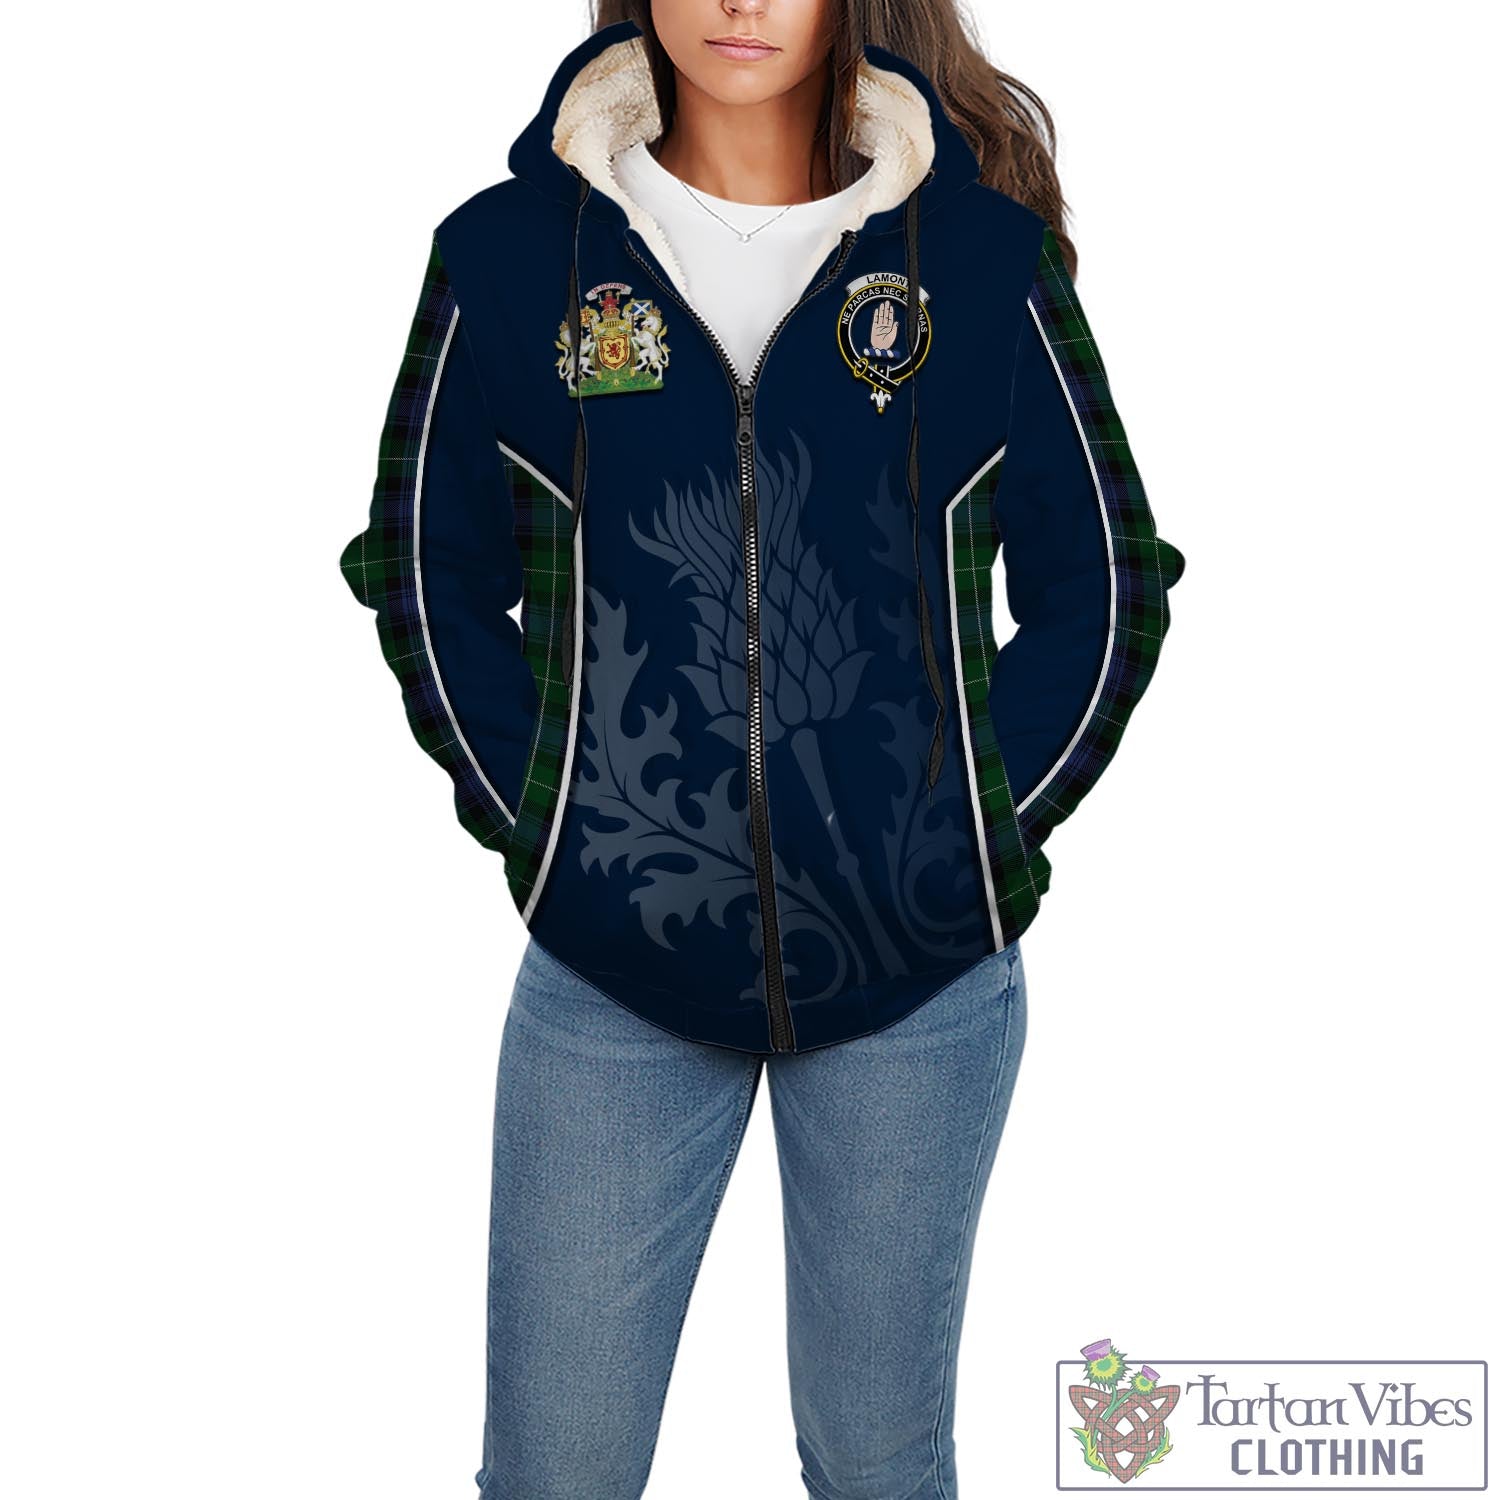 Tartan Vibes Clothing Lamont #2 Tartan Sherpa Hoodie with Family Crest and Scottish Thistle Vibes Sport Style